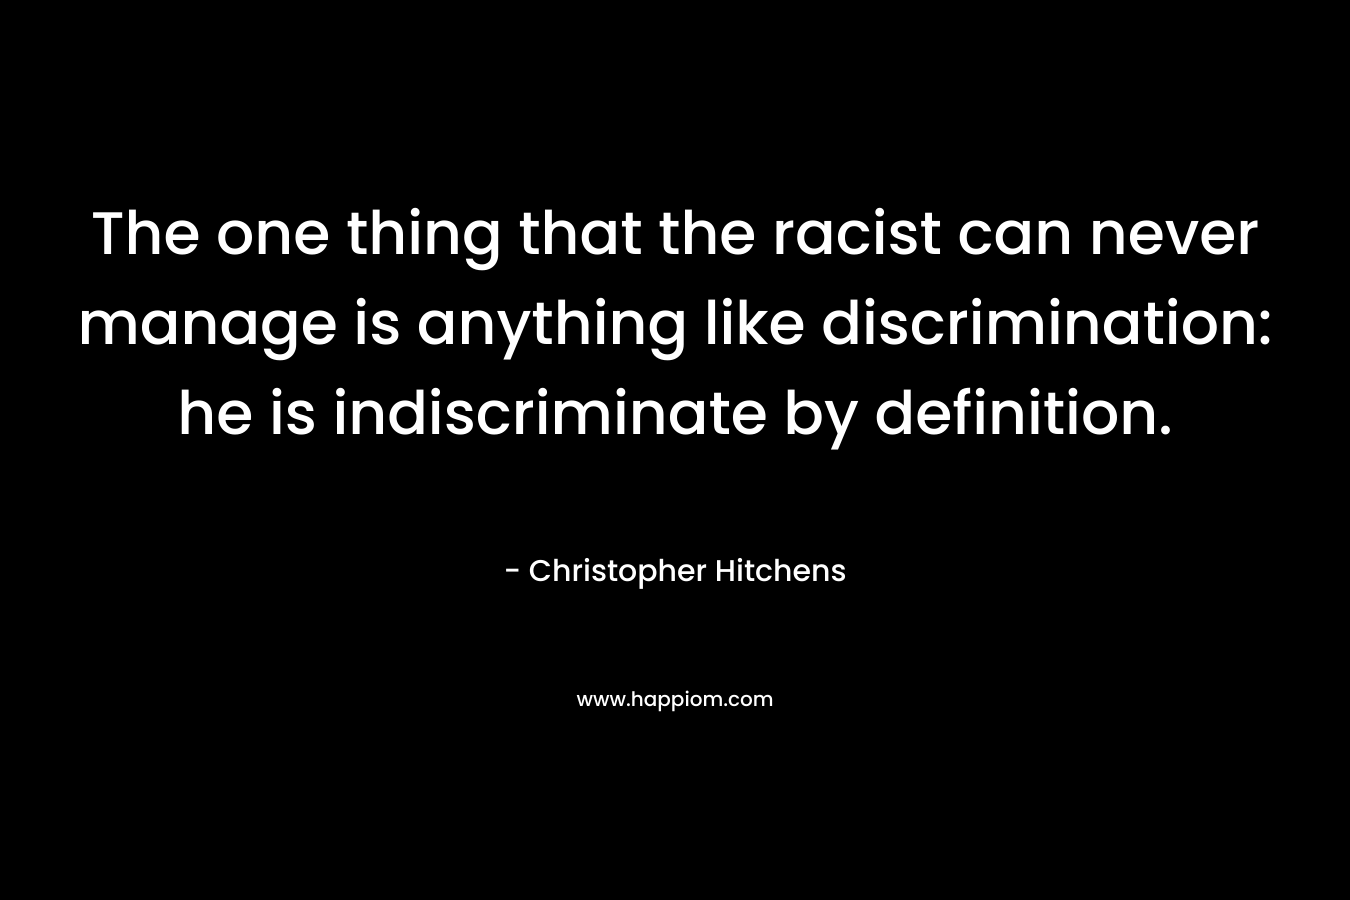 The one thing that the racist can never manage is anything like discrimination: he is indiscriminate by definition. – Christopher Hitchens